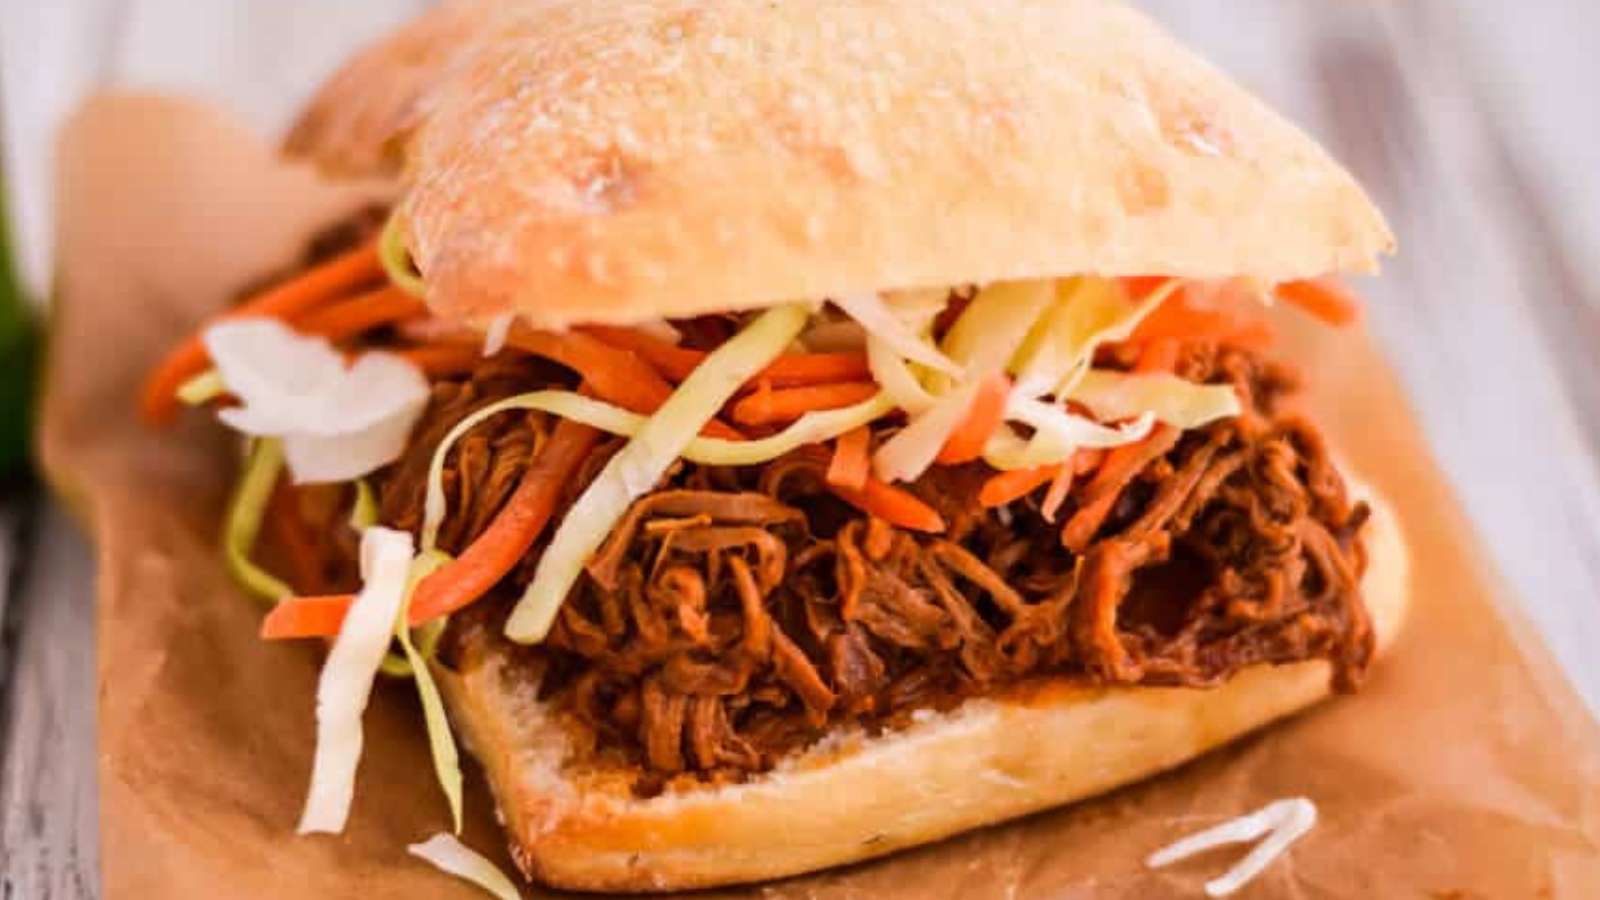 A pulled pork sandwich with slaw and carrots.